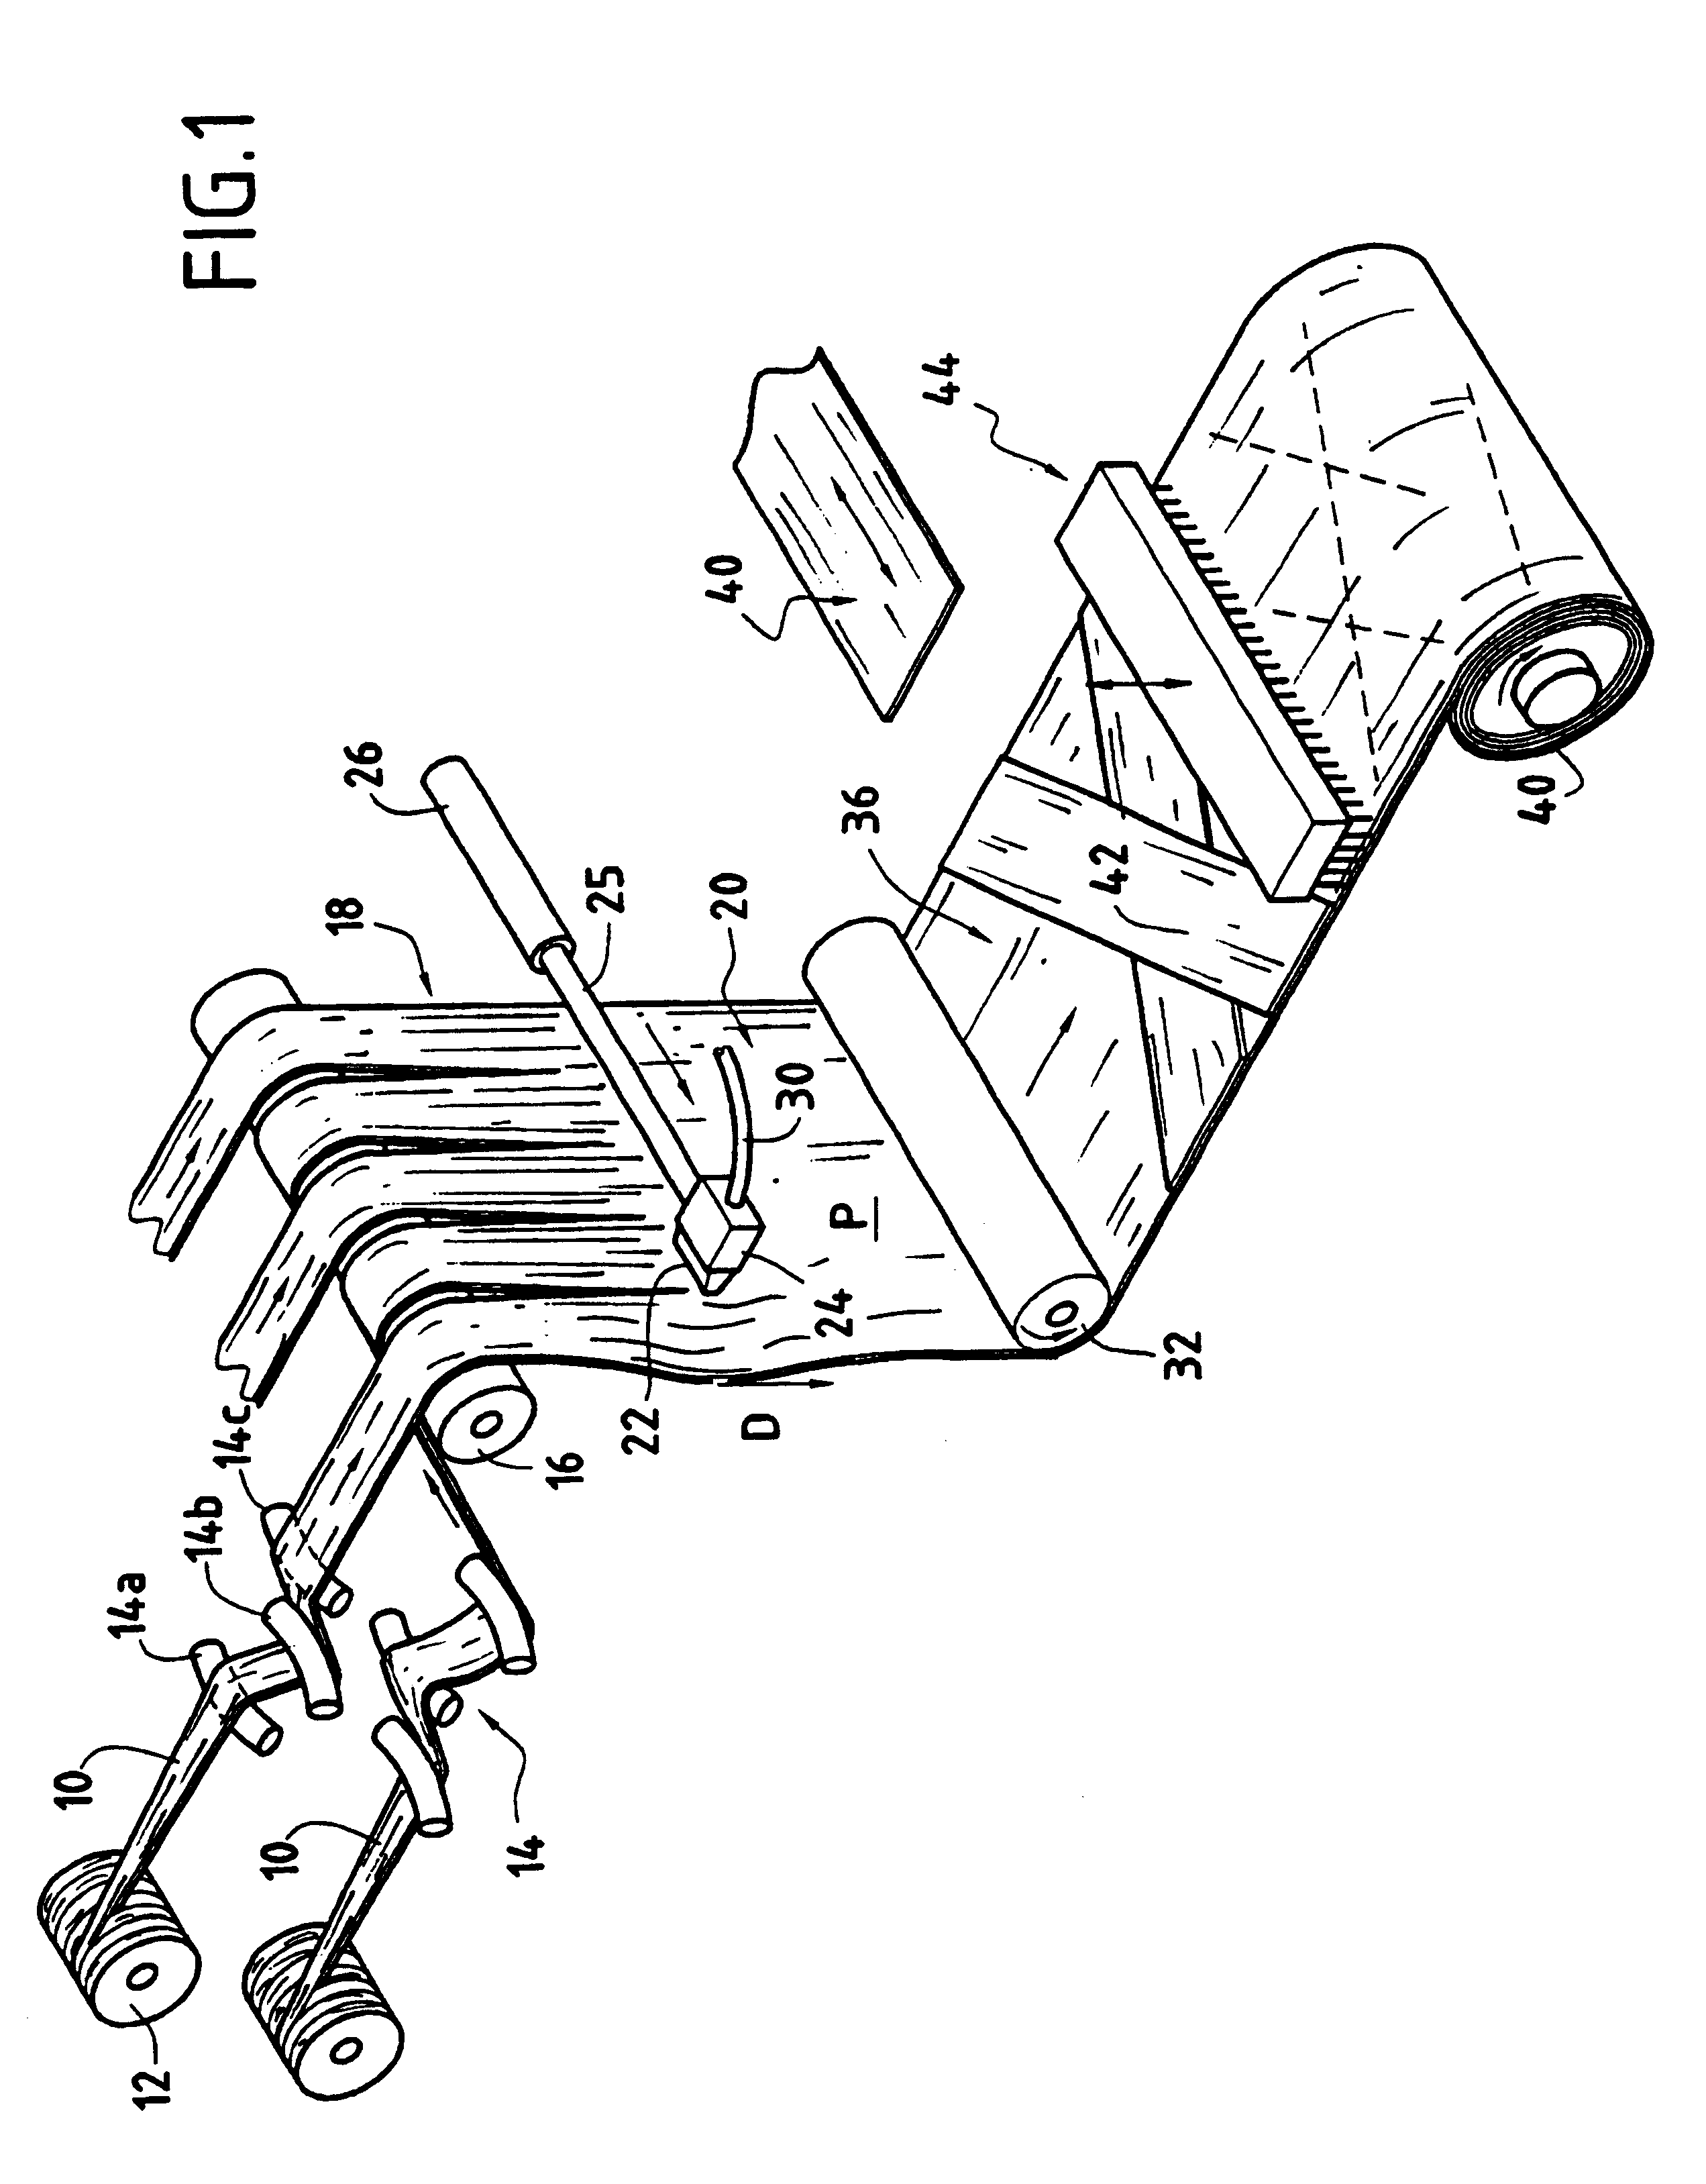 Method and apparatus for making a fiber sheet by spreading out tows.